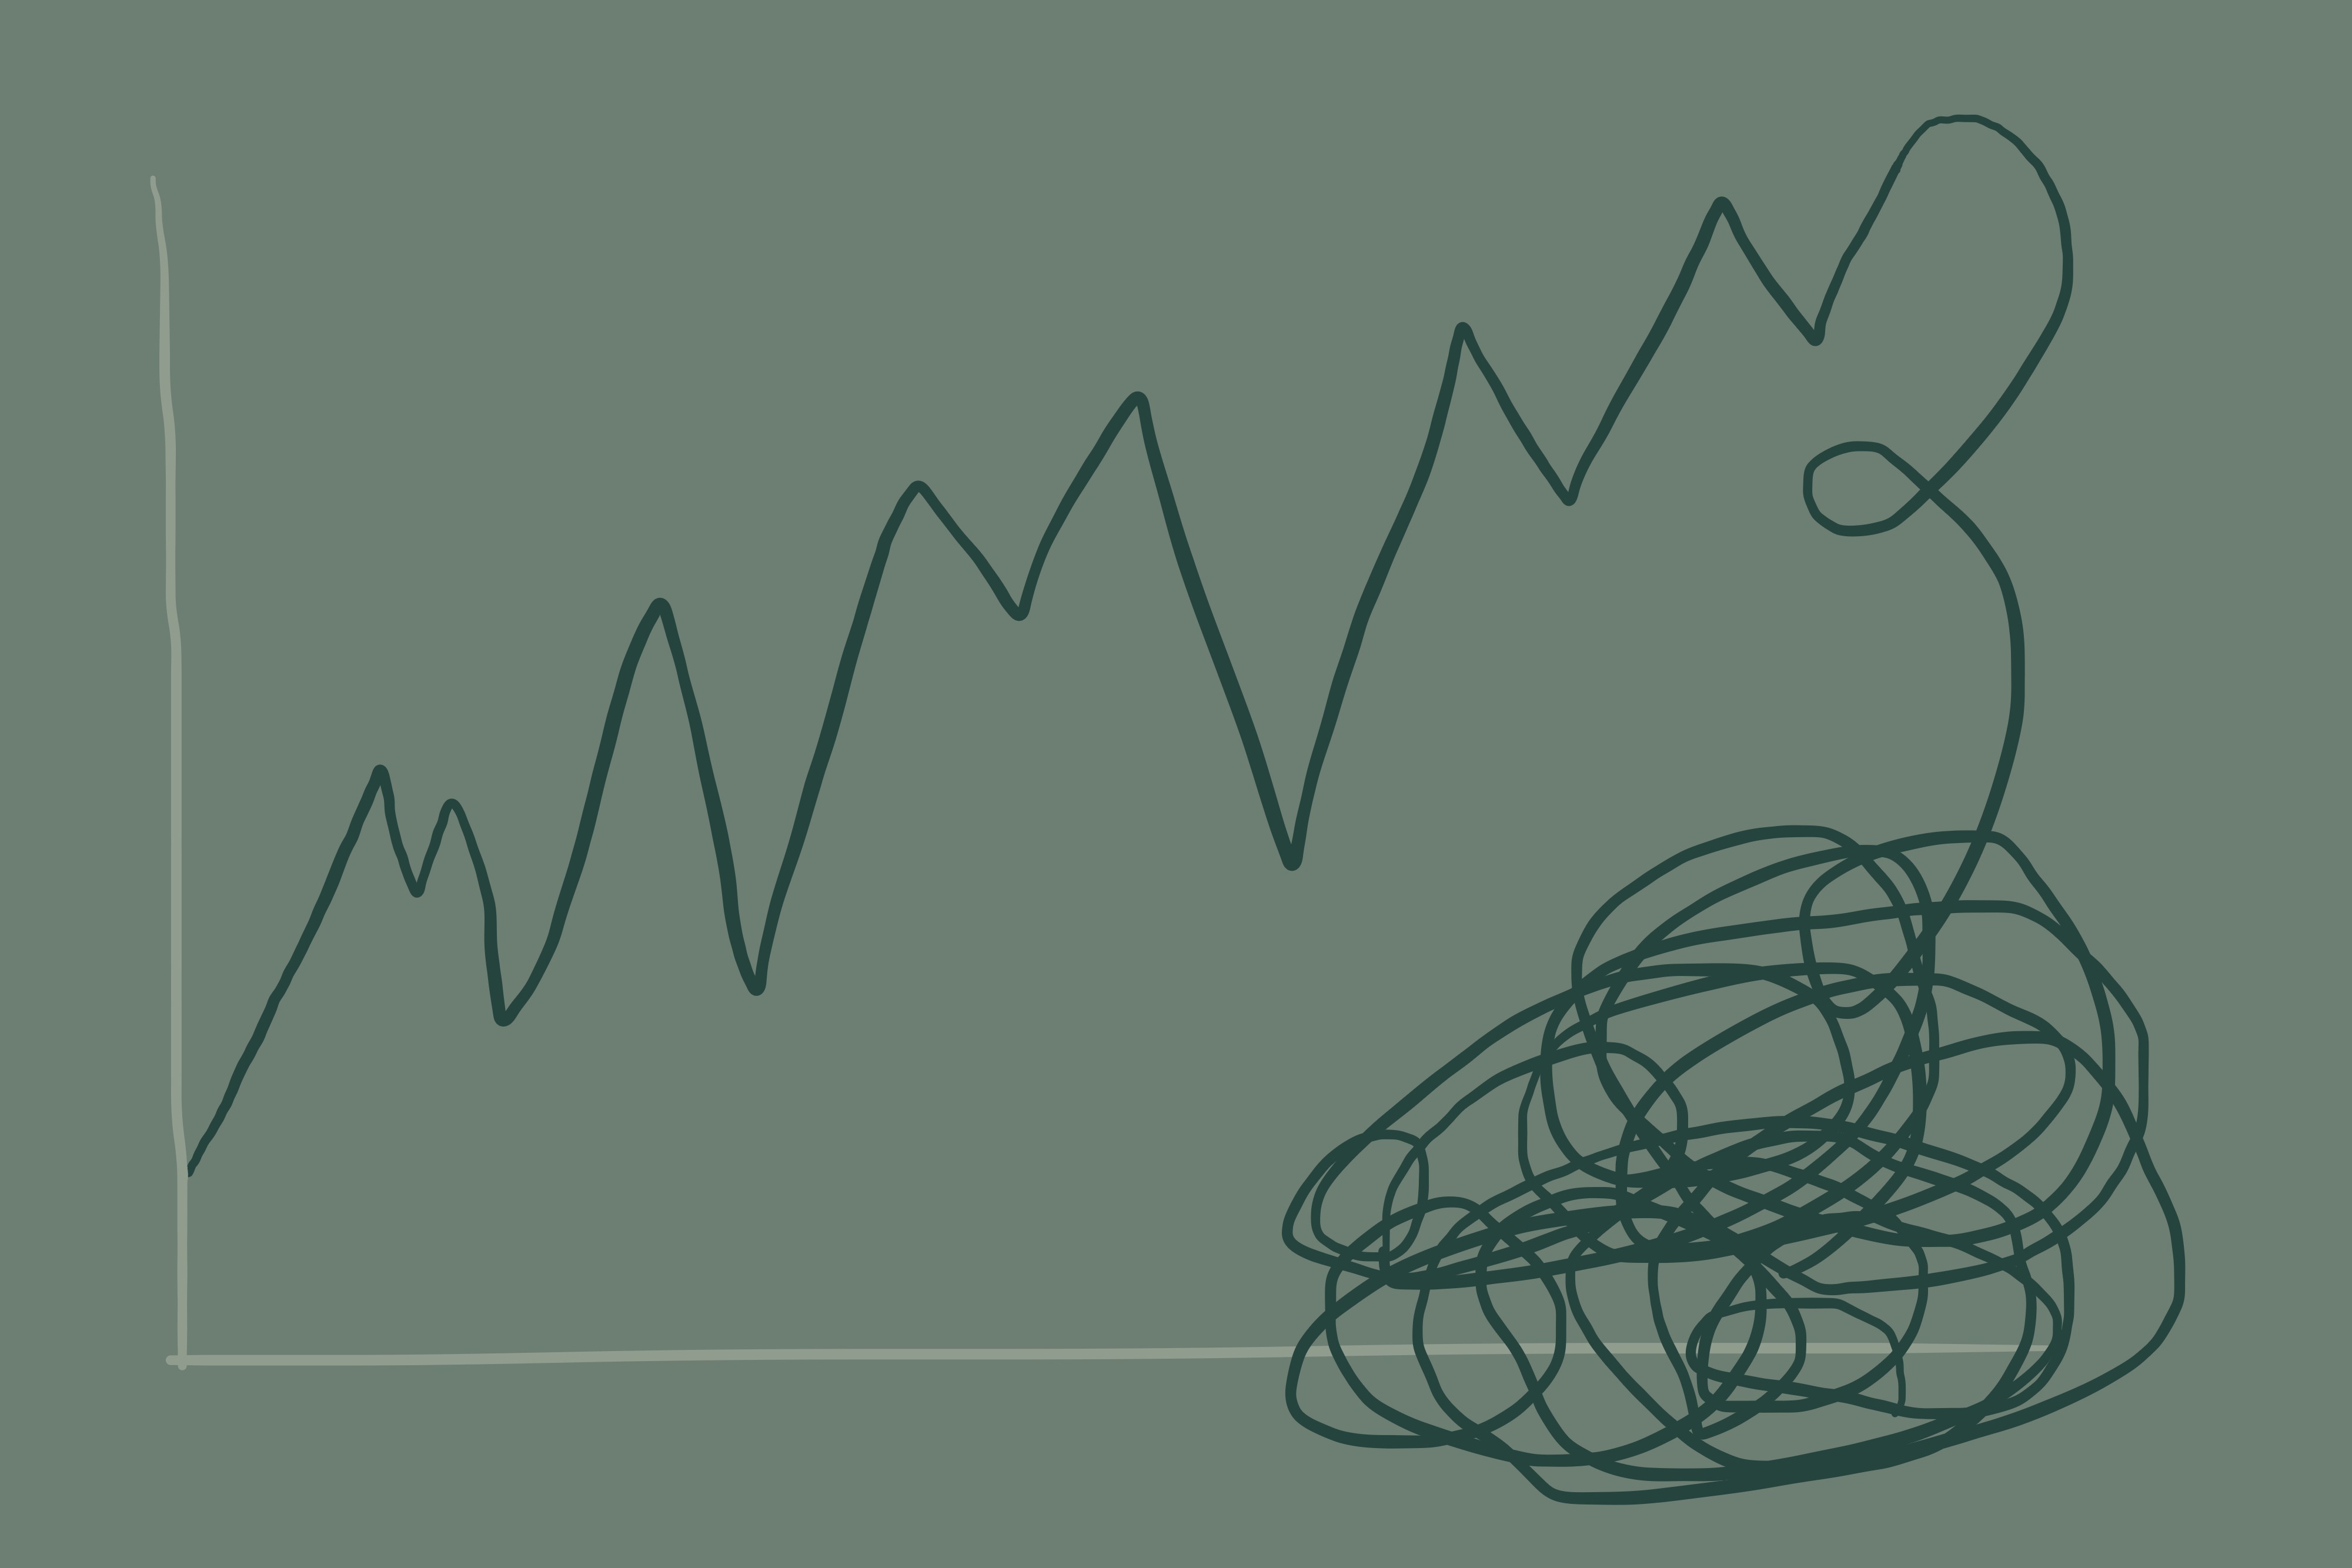 abstract drawing of a rising stock market graph spiraling out of control